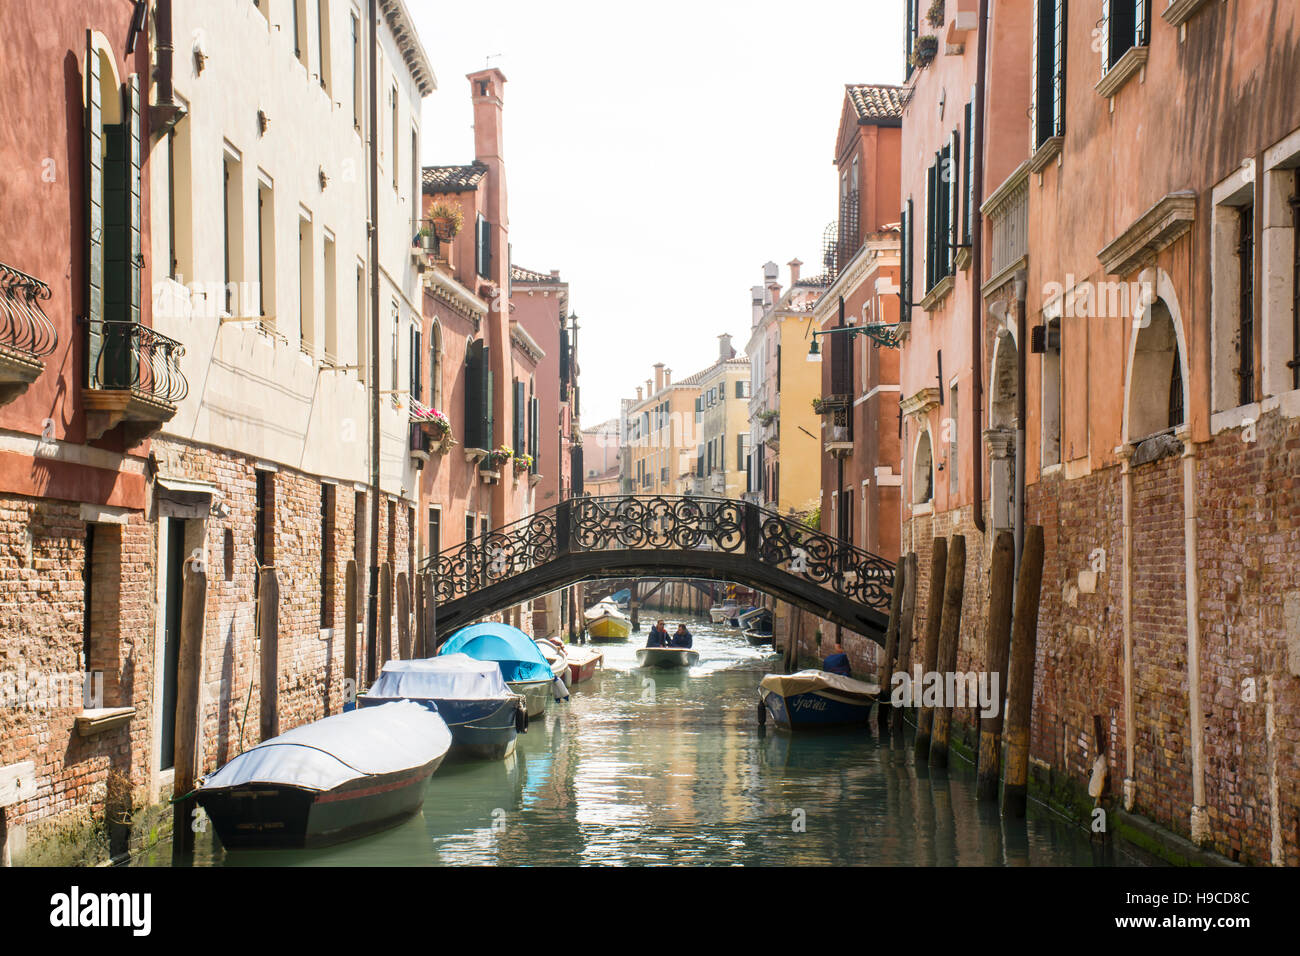 Boats in a narrow canal in Venice, Italy Stock Photo